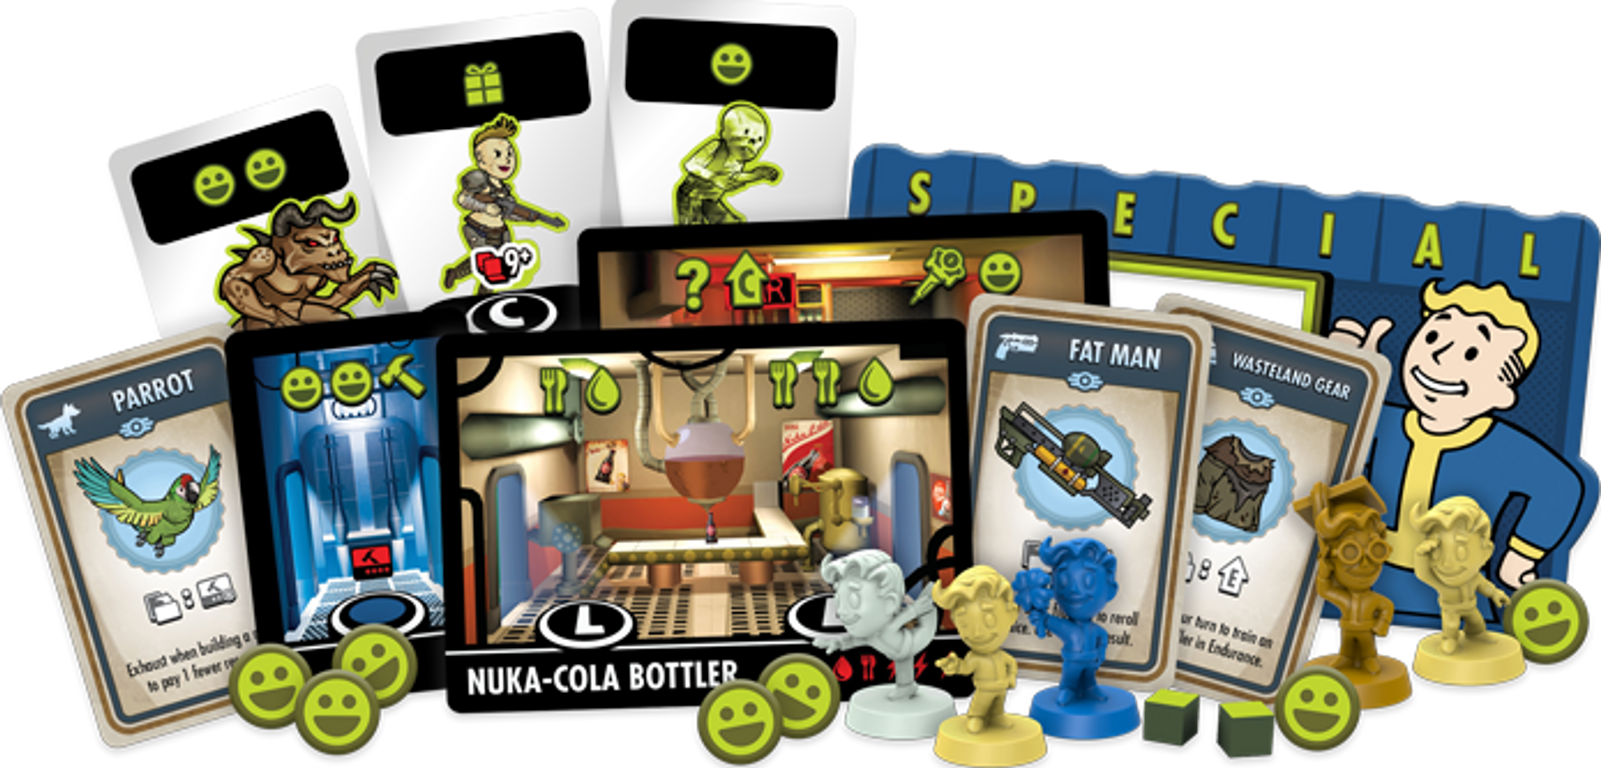 Fallout Shelter: The Board Game components